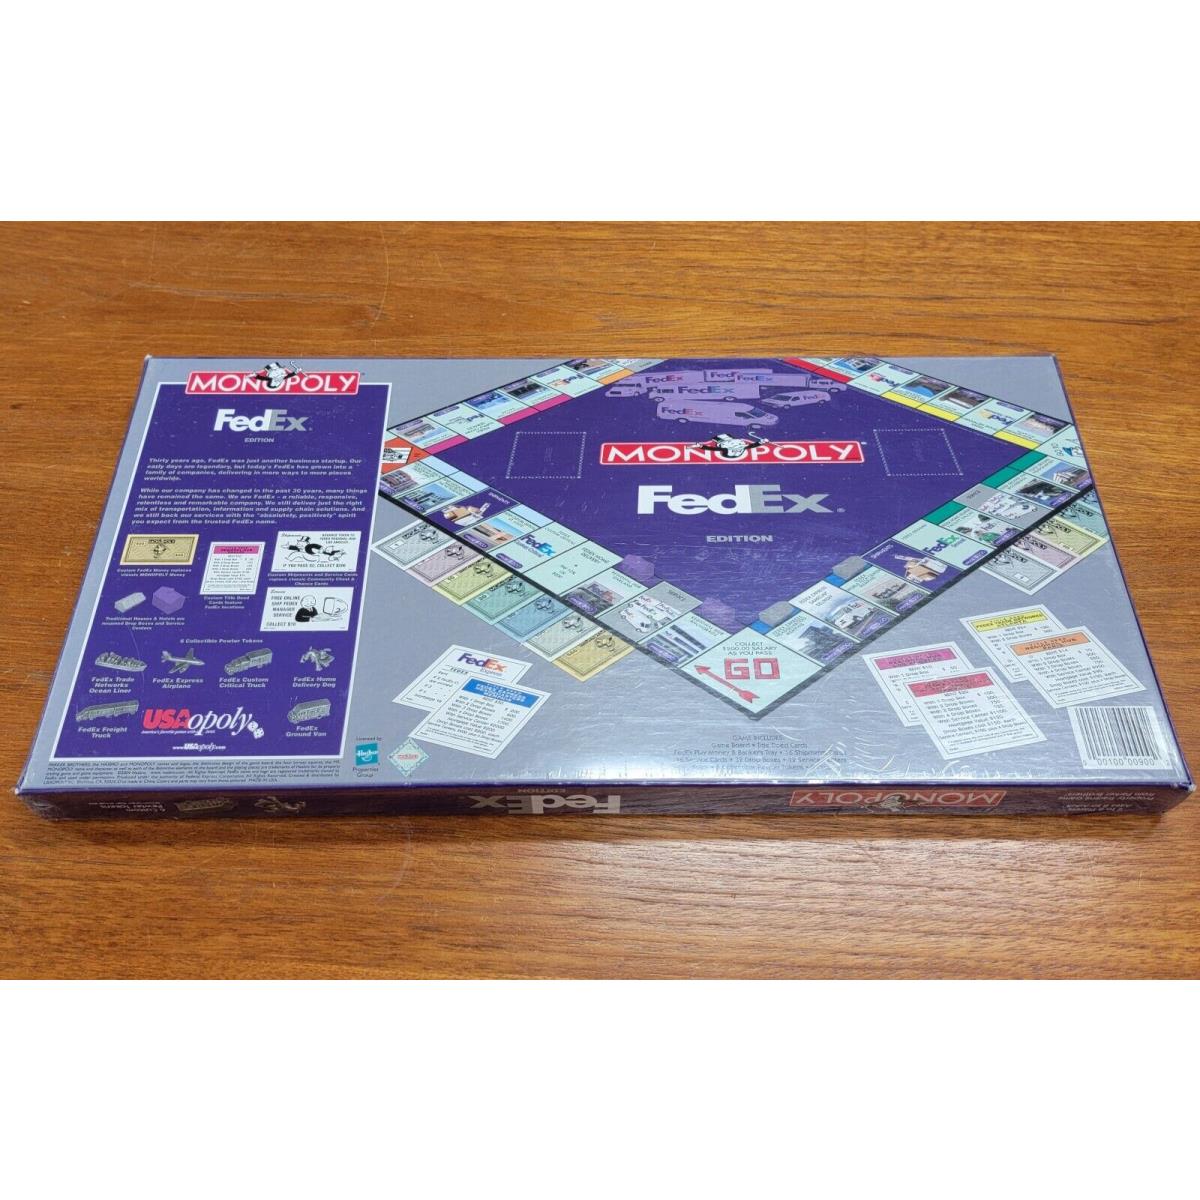 Monopoly Fedex Edition 2004 Hasbro Usaopoly Never Opened